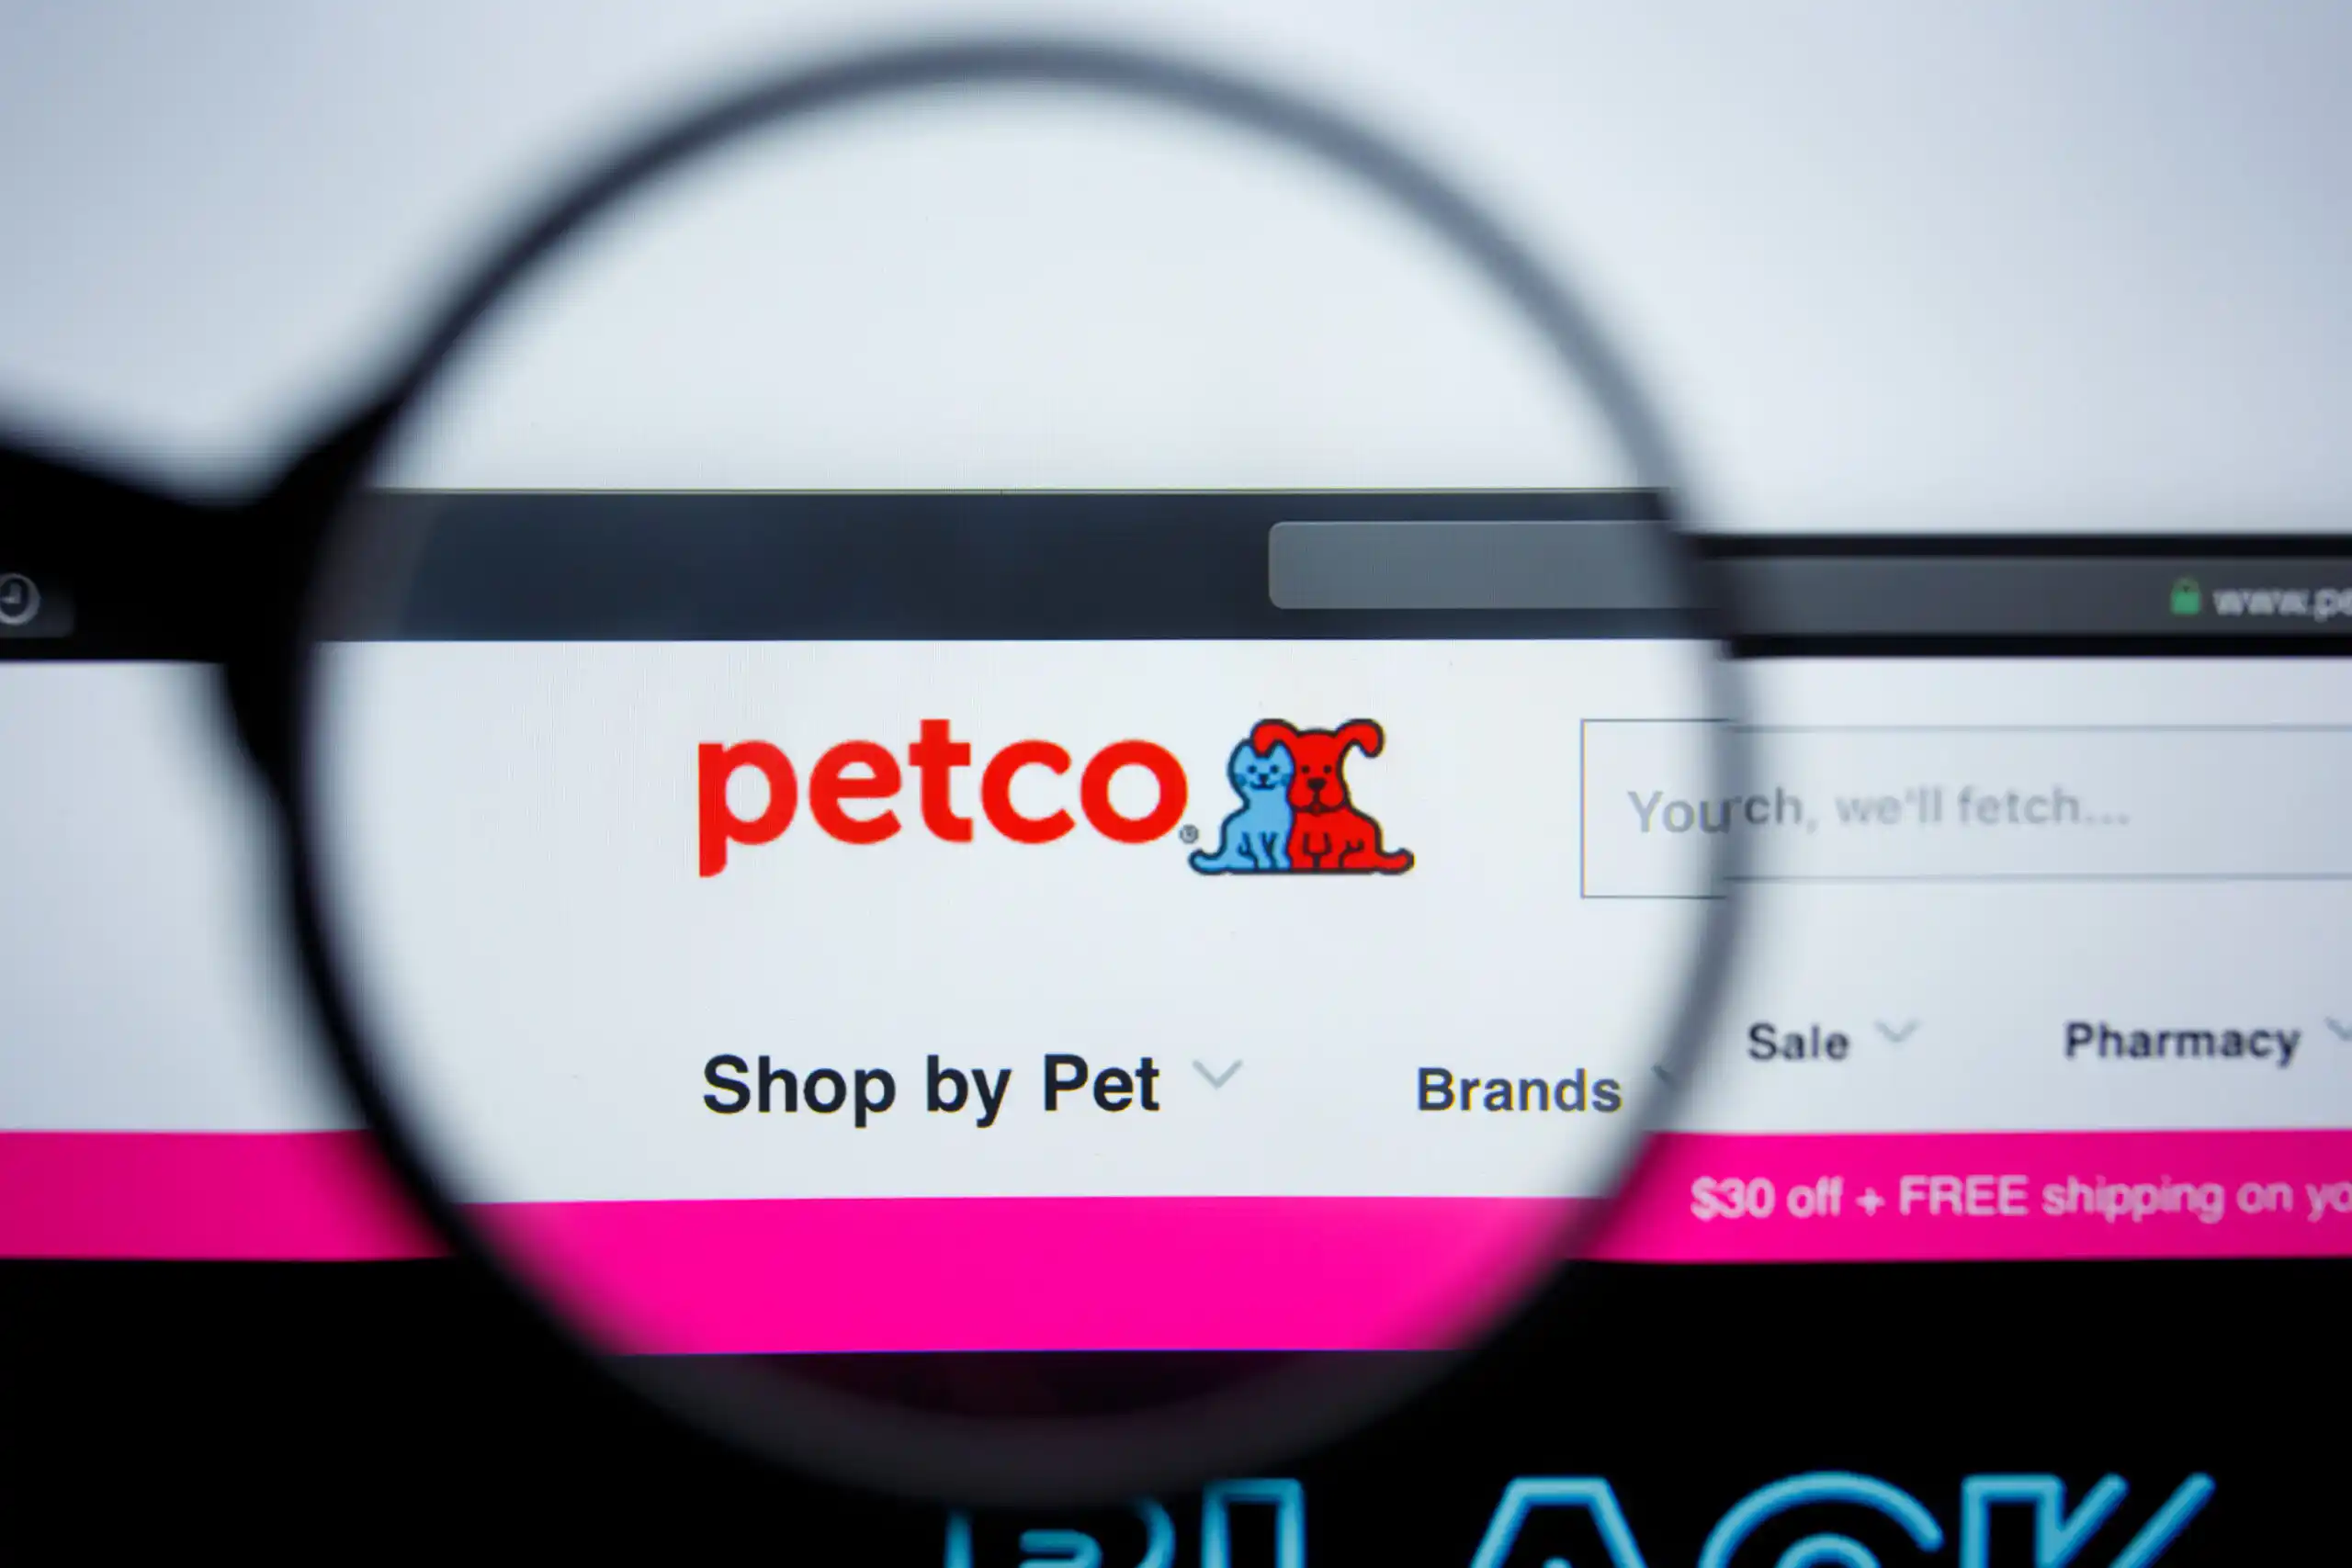 Pet Supplies from Petco